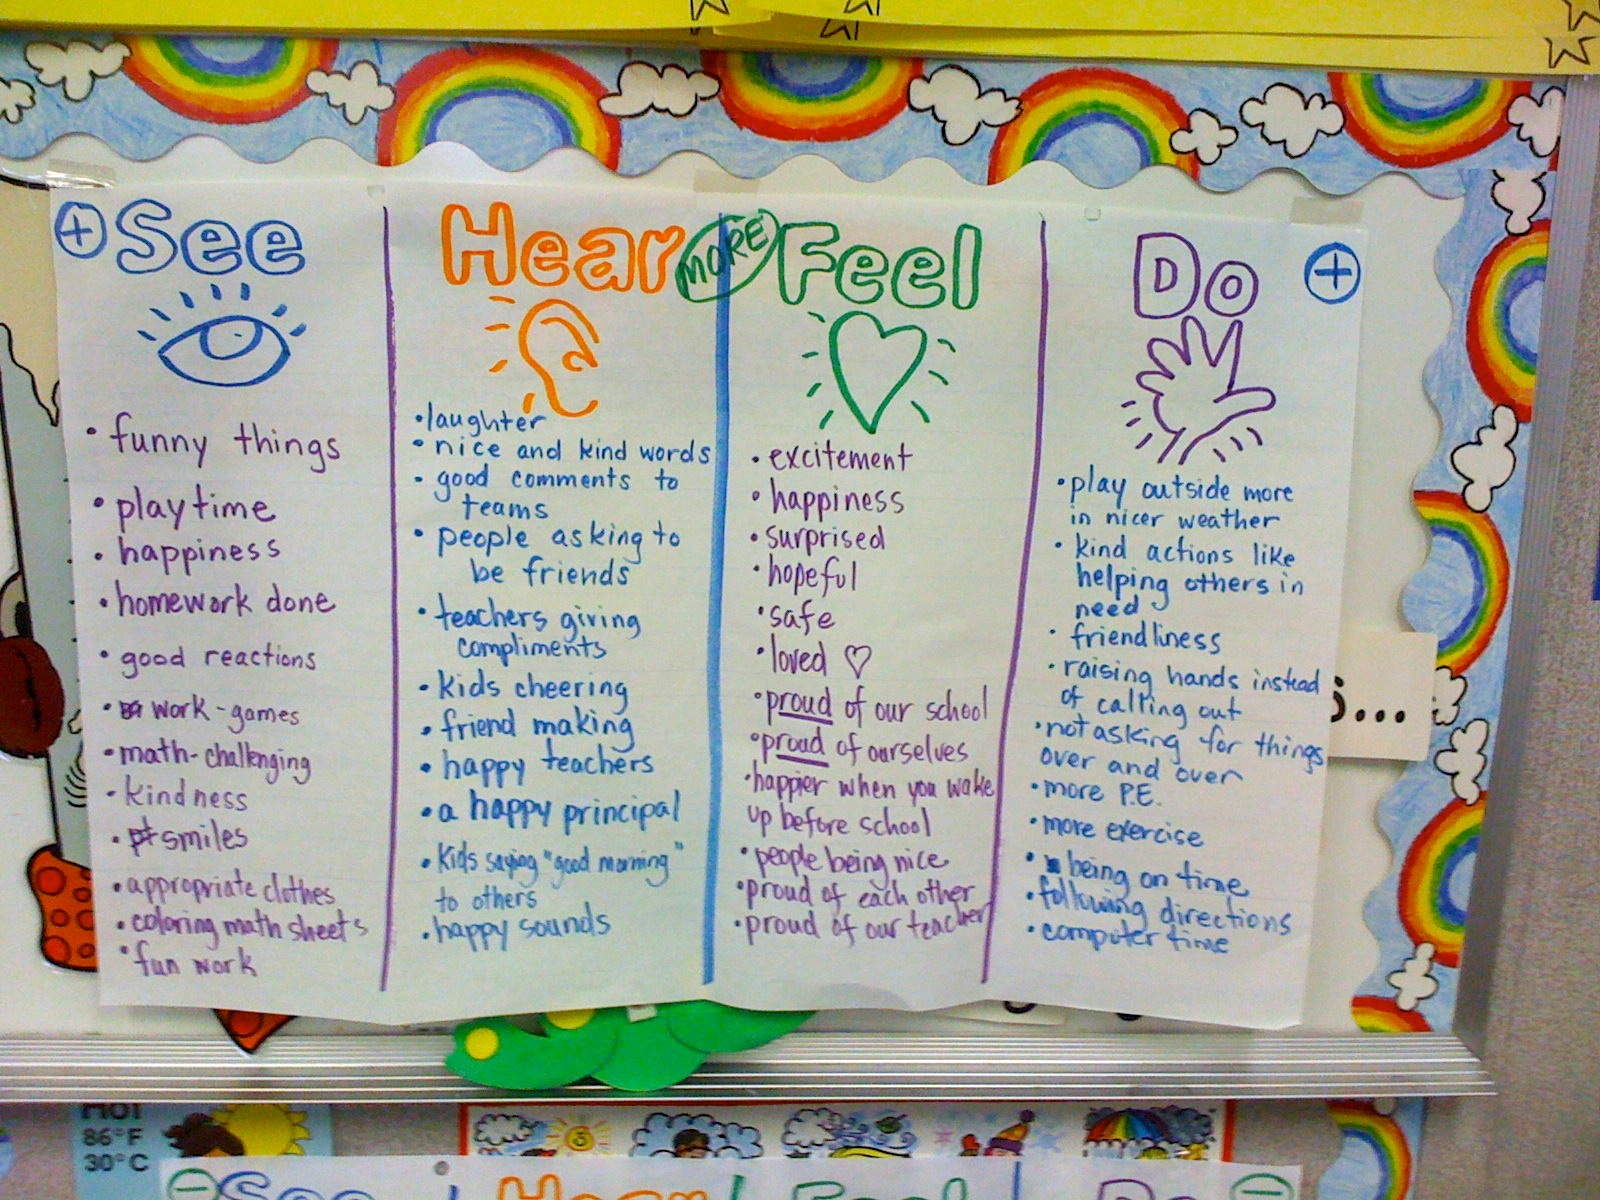 How To Use Behavior Charts In The Classroom